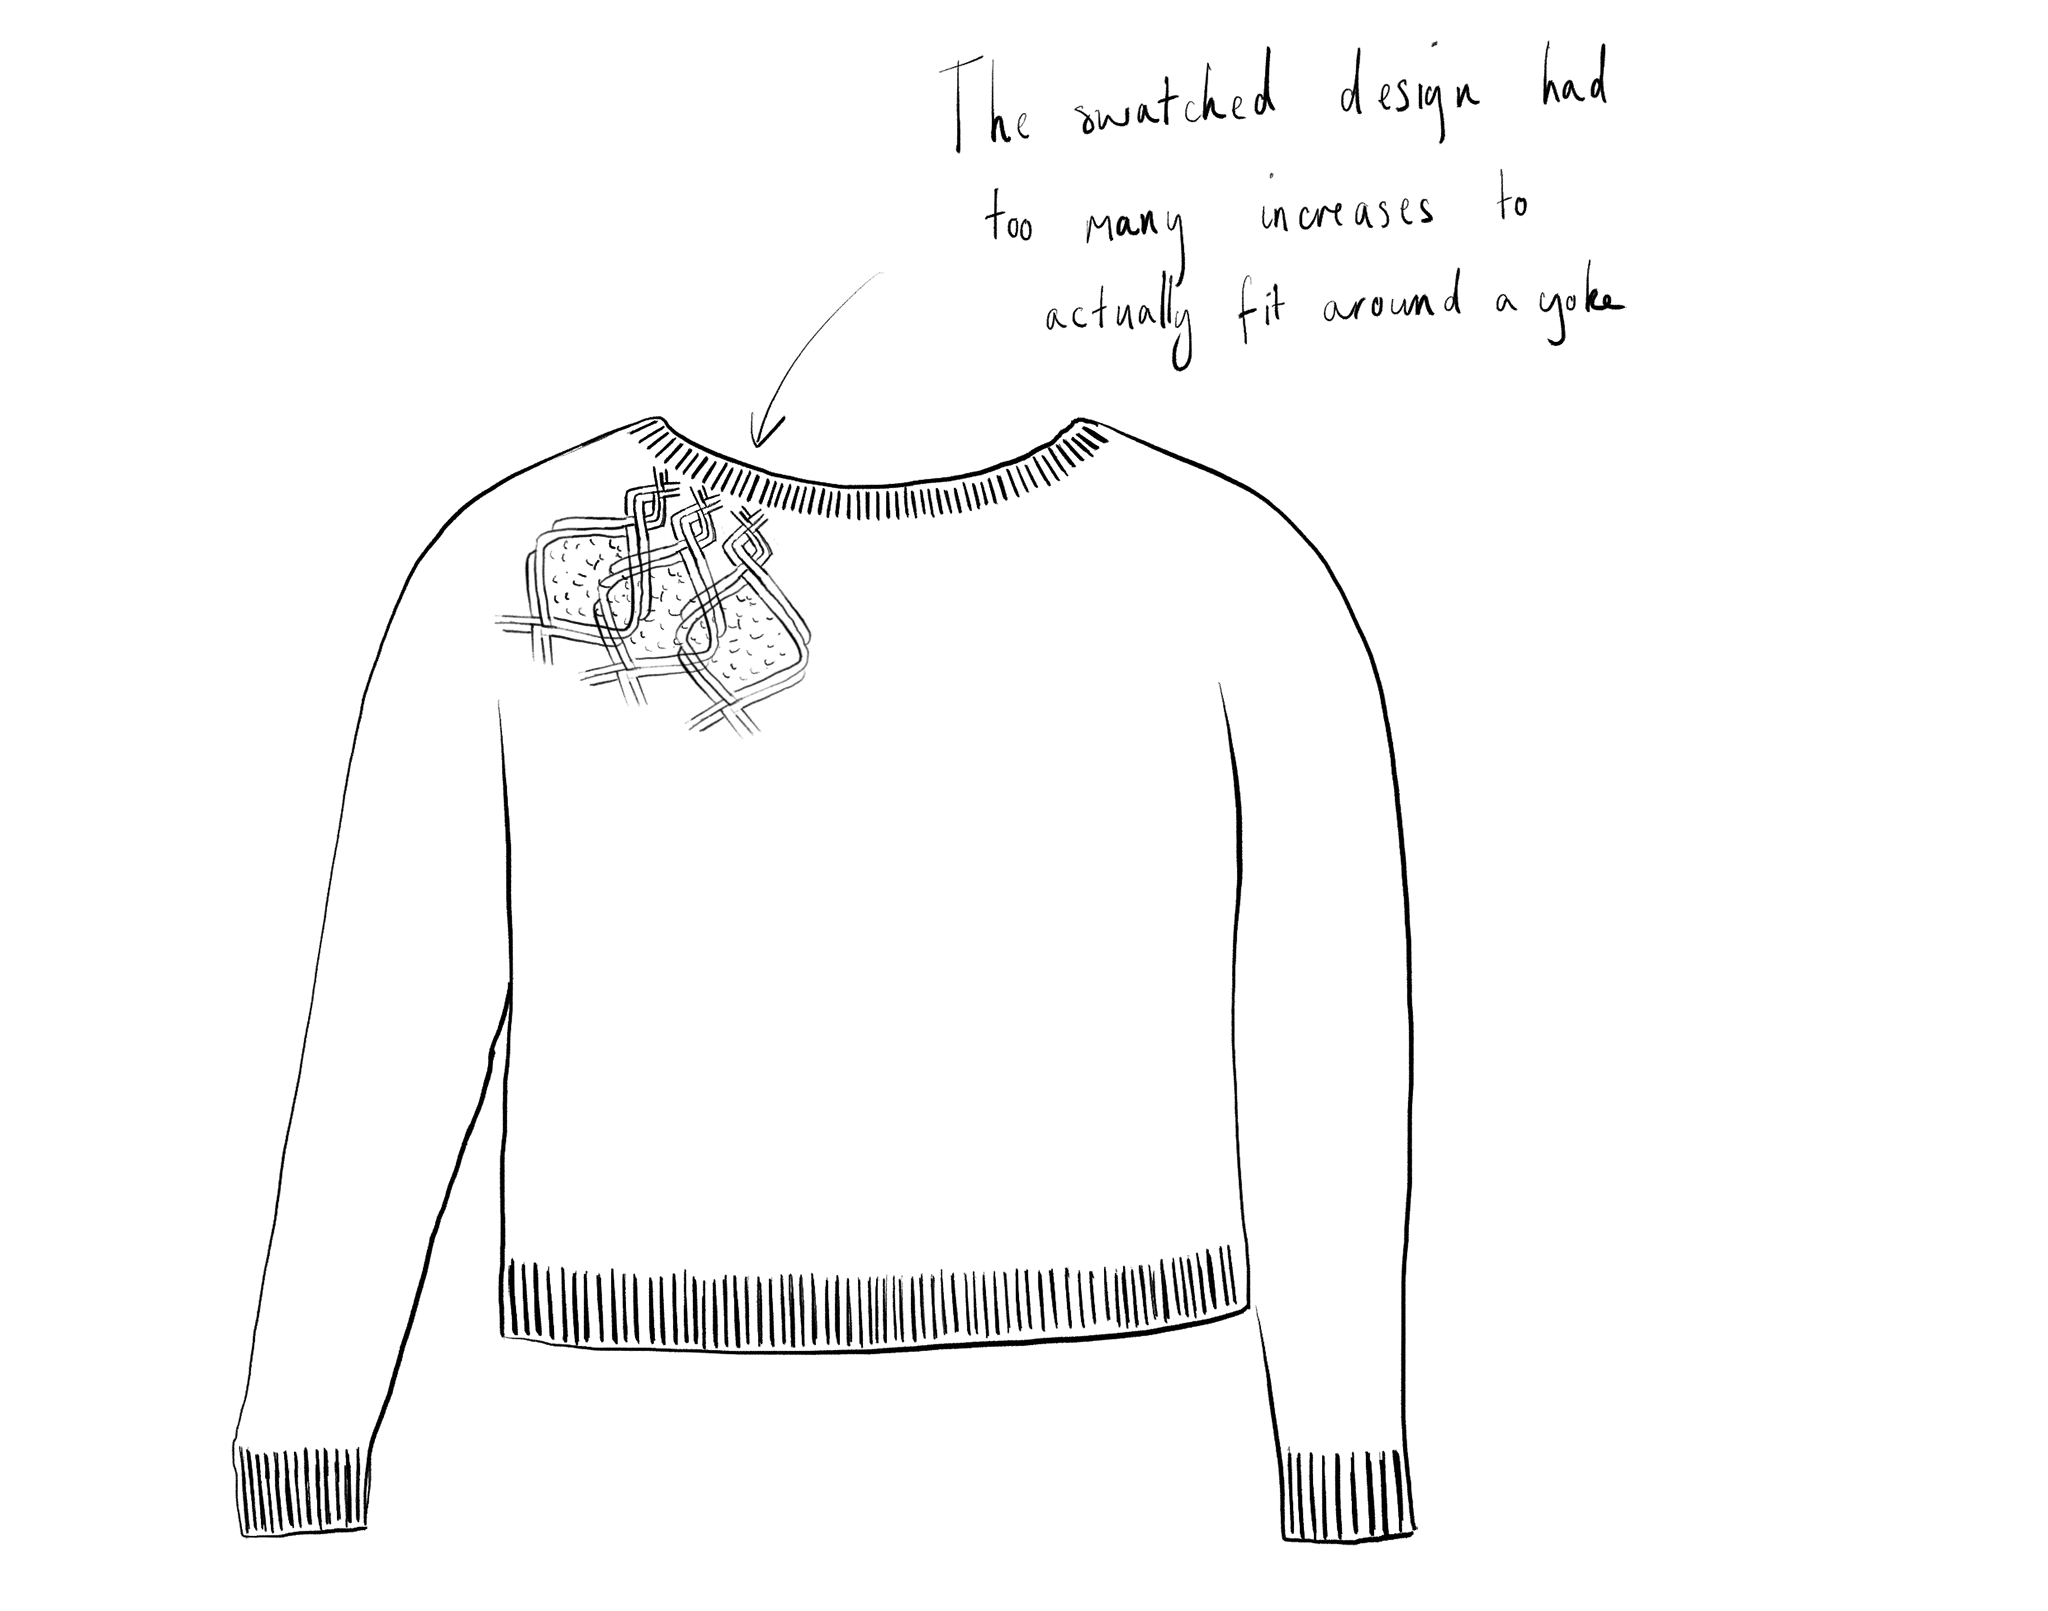 a line sketch of a sweater body with cabled yoke detail and the handwritten text 'The swatched design had too many increases to actually fit around a yoke.'